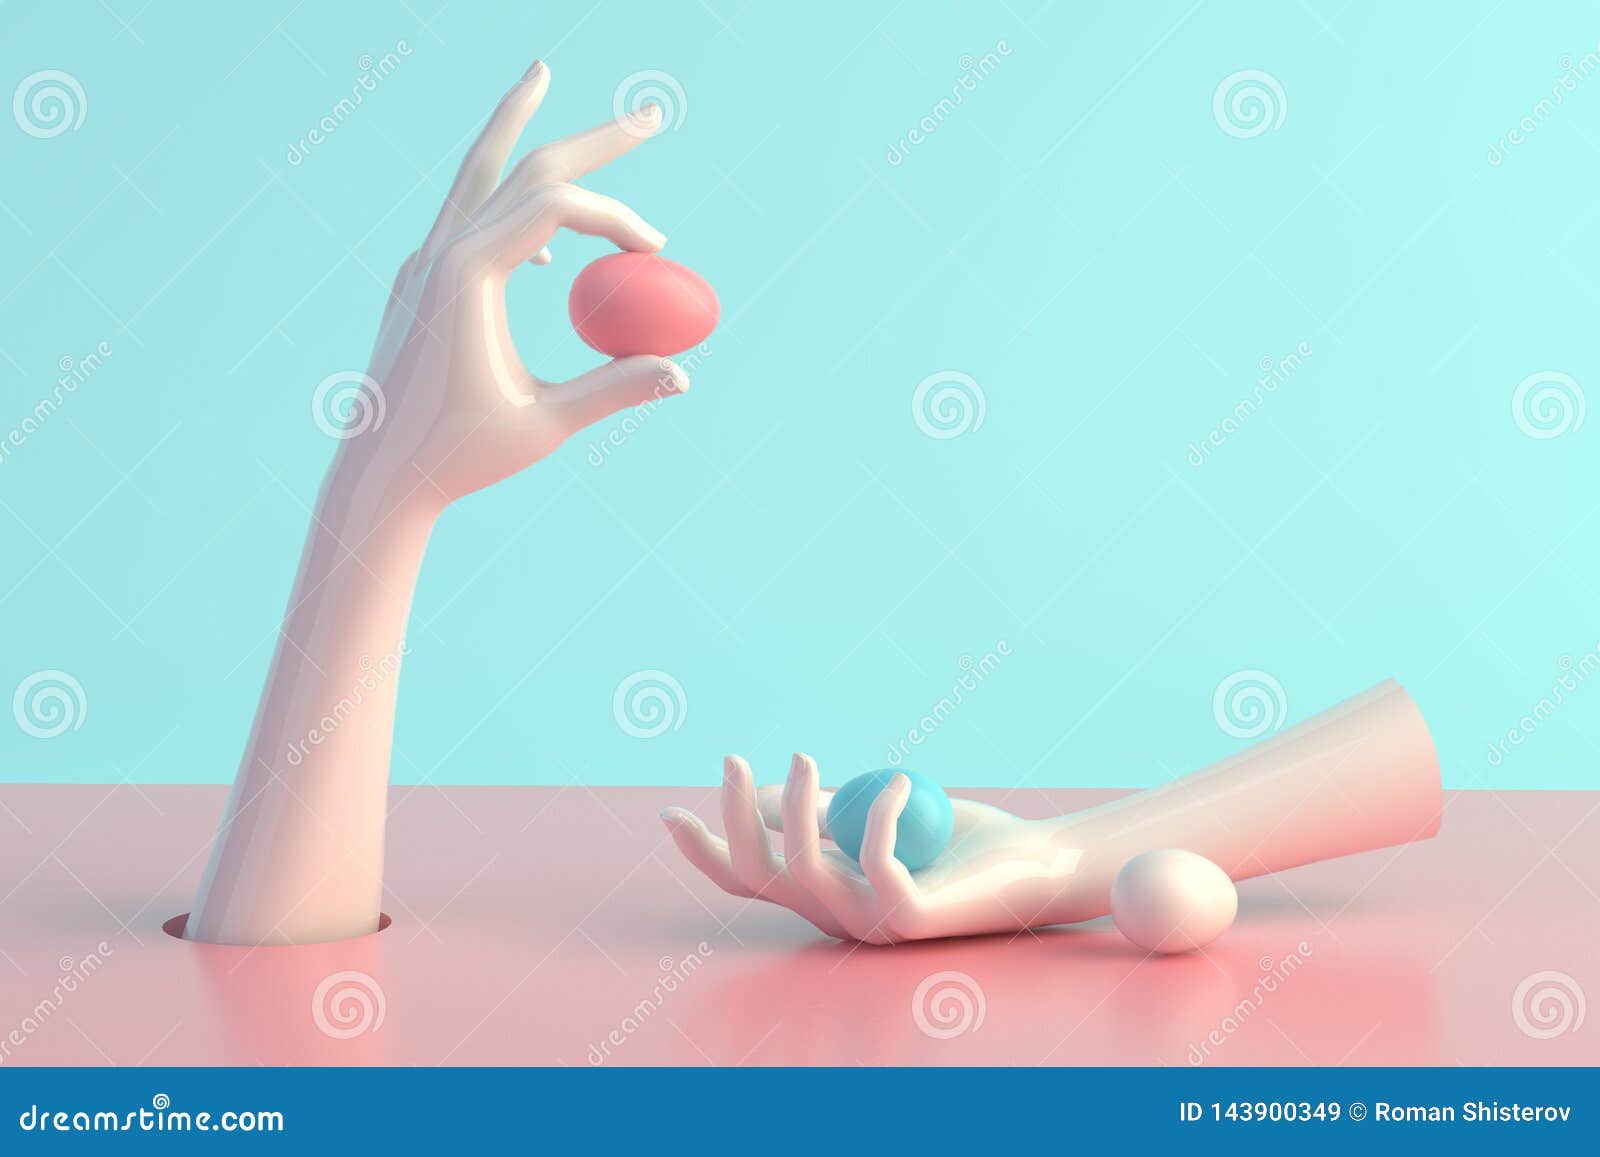 3d render, female hands, minimal fashion background, mannequin body parts with easter eggs